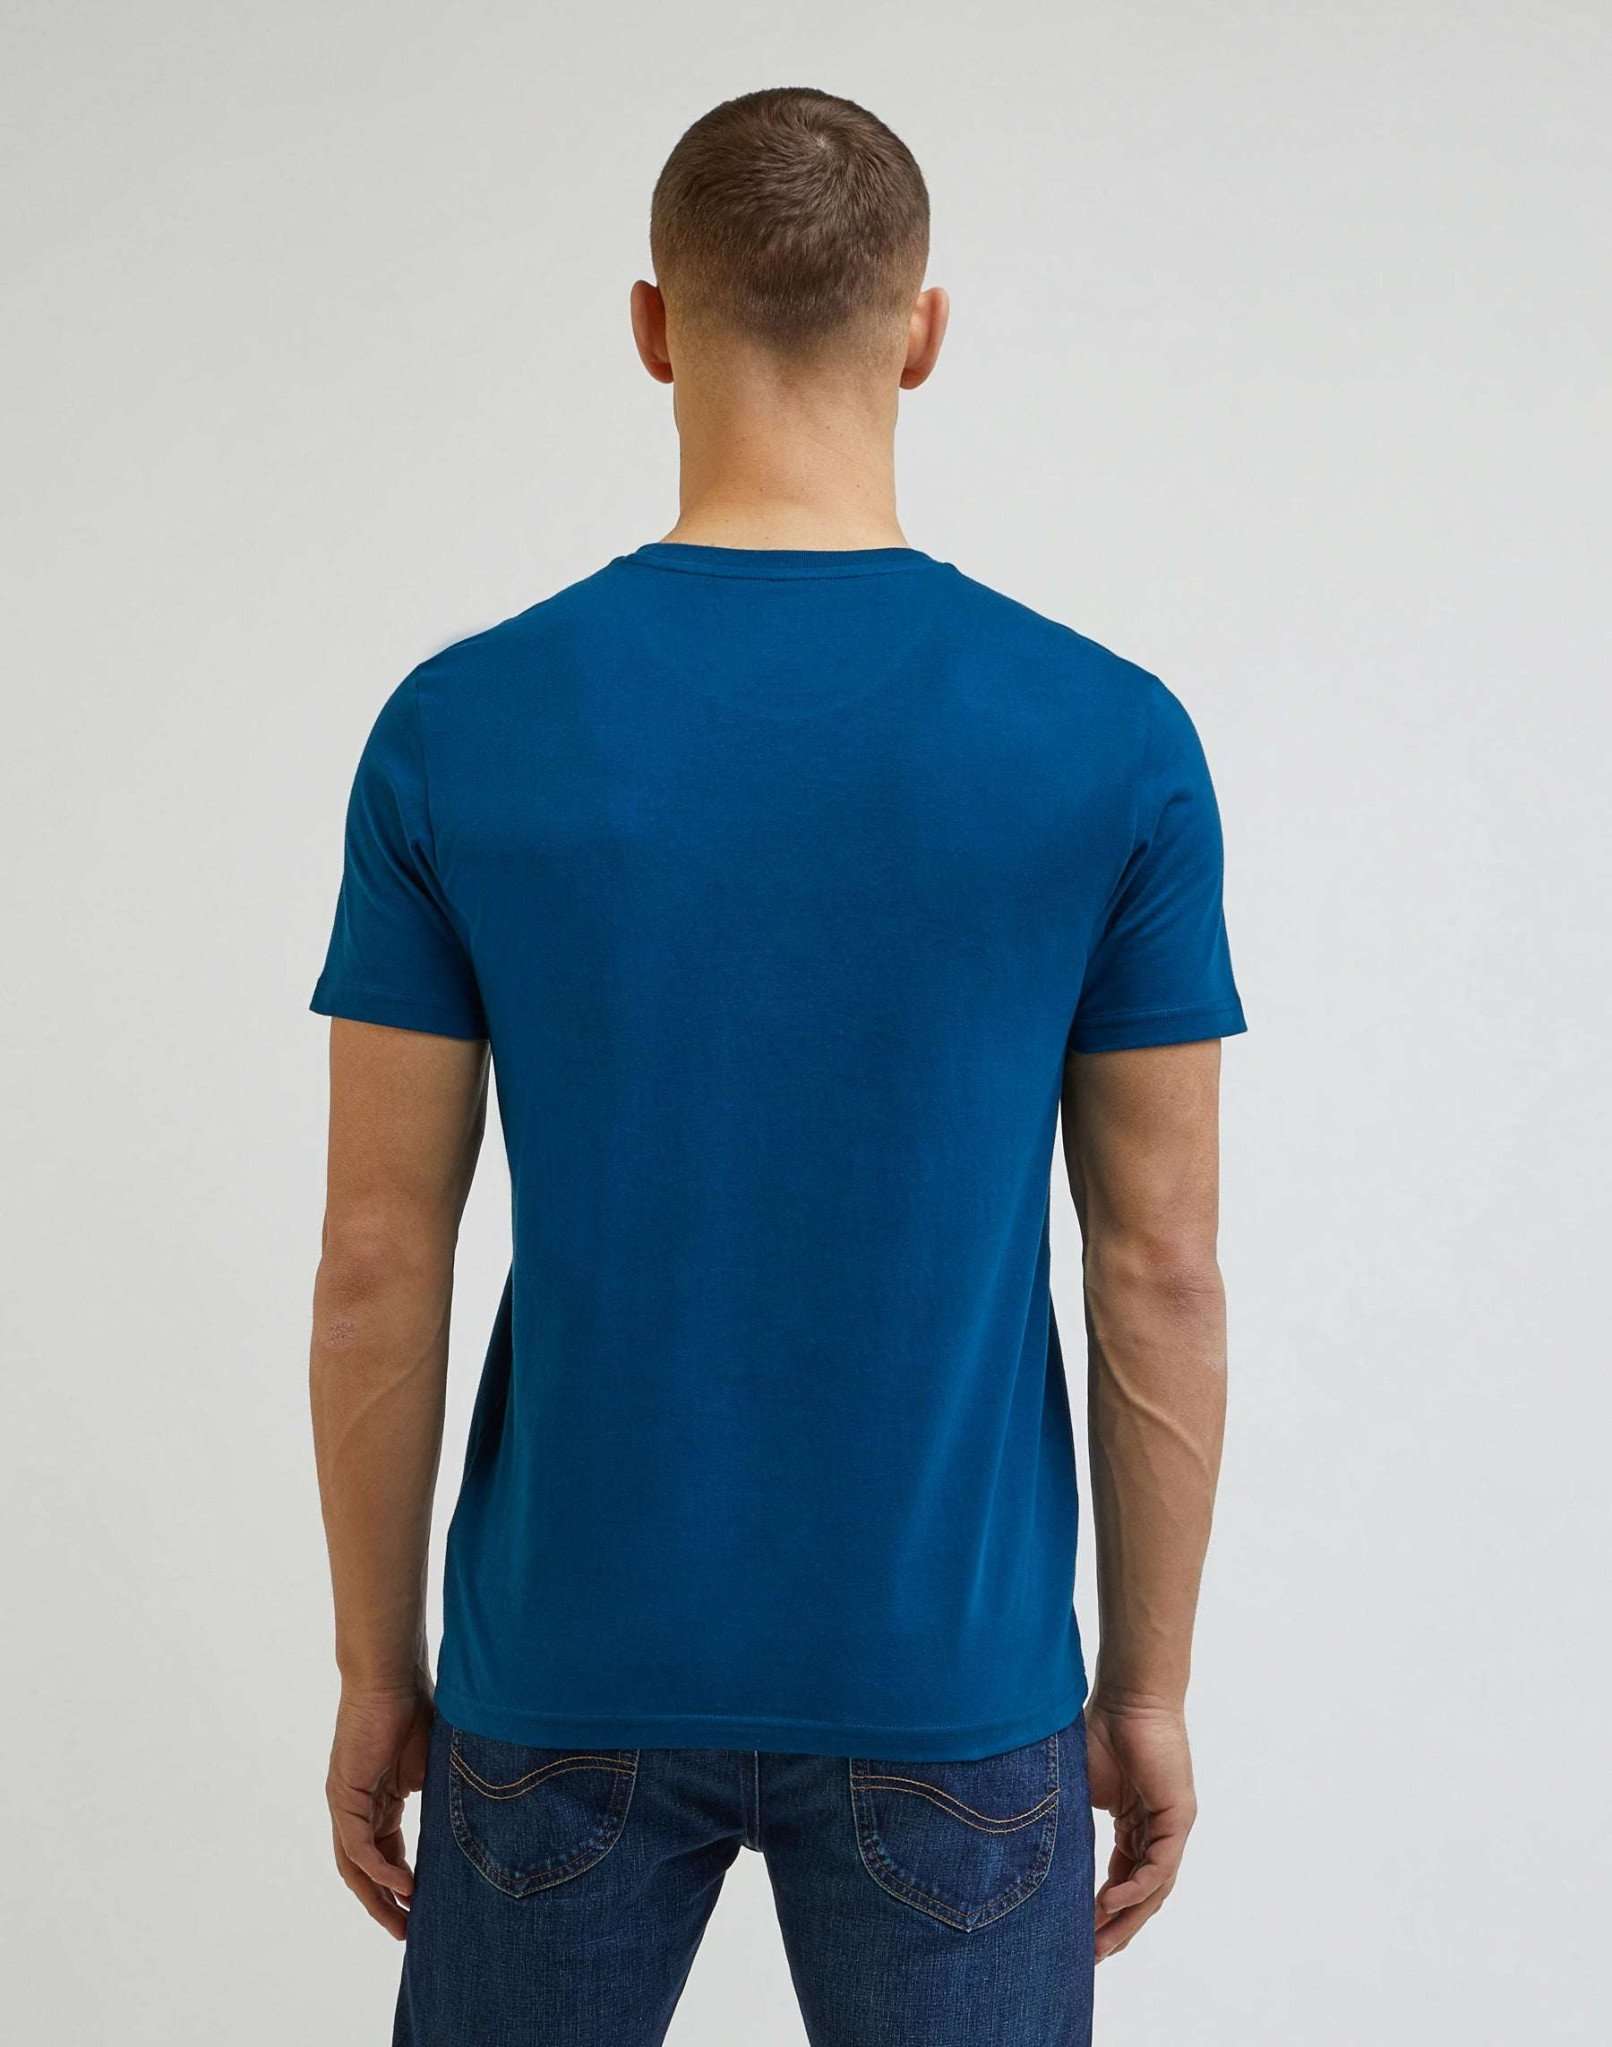 Patch Logo Tee in Royal Teal T-Shirts Lee   